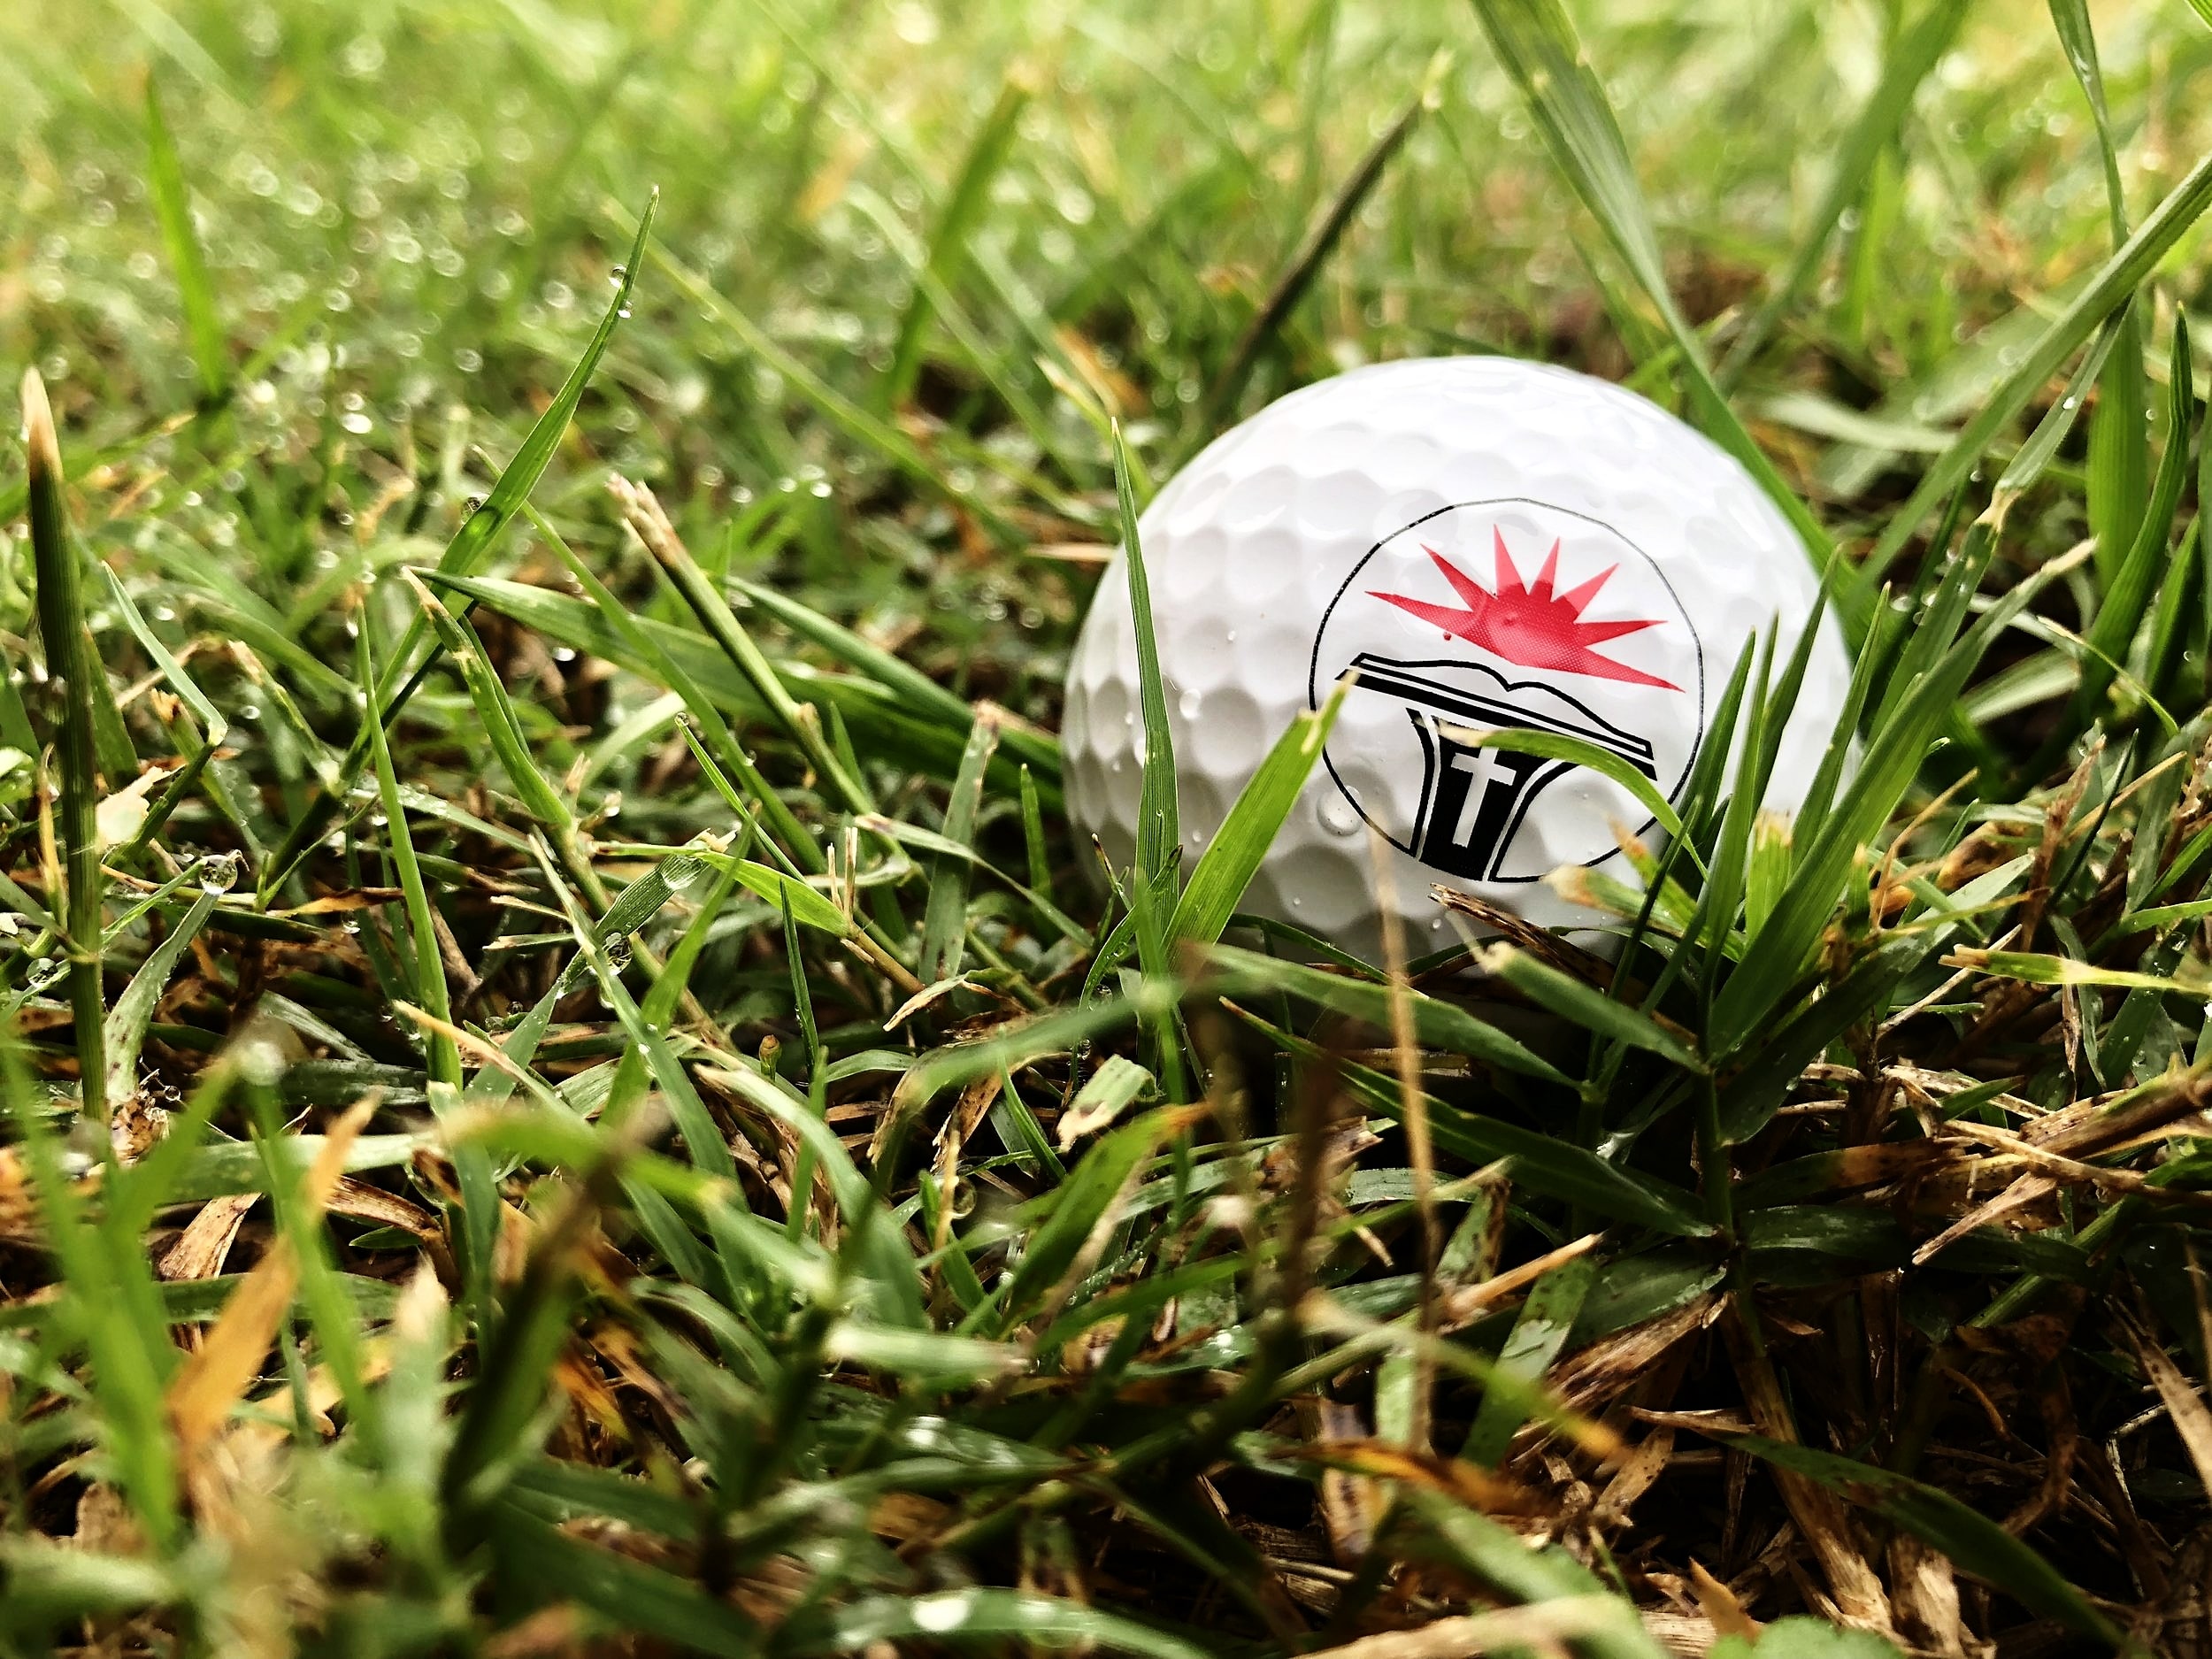 NGU embroidered golf ball provided by NGU athletic sponsor, Taylor Made.